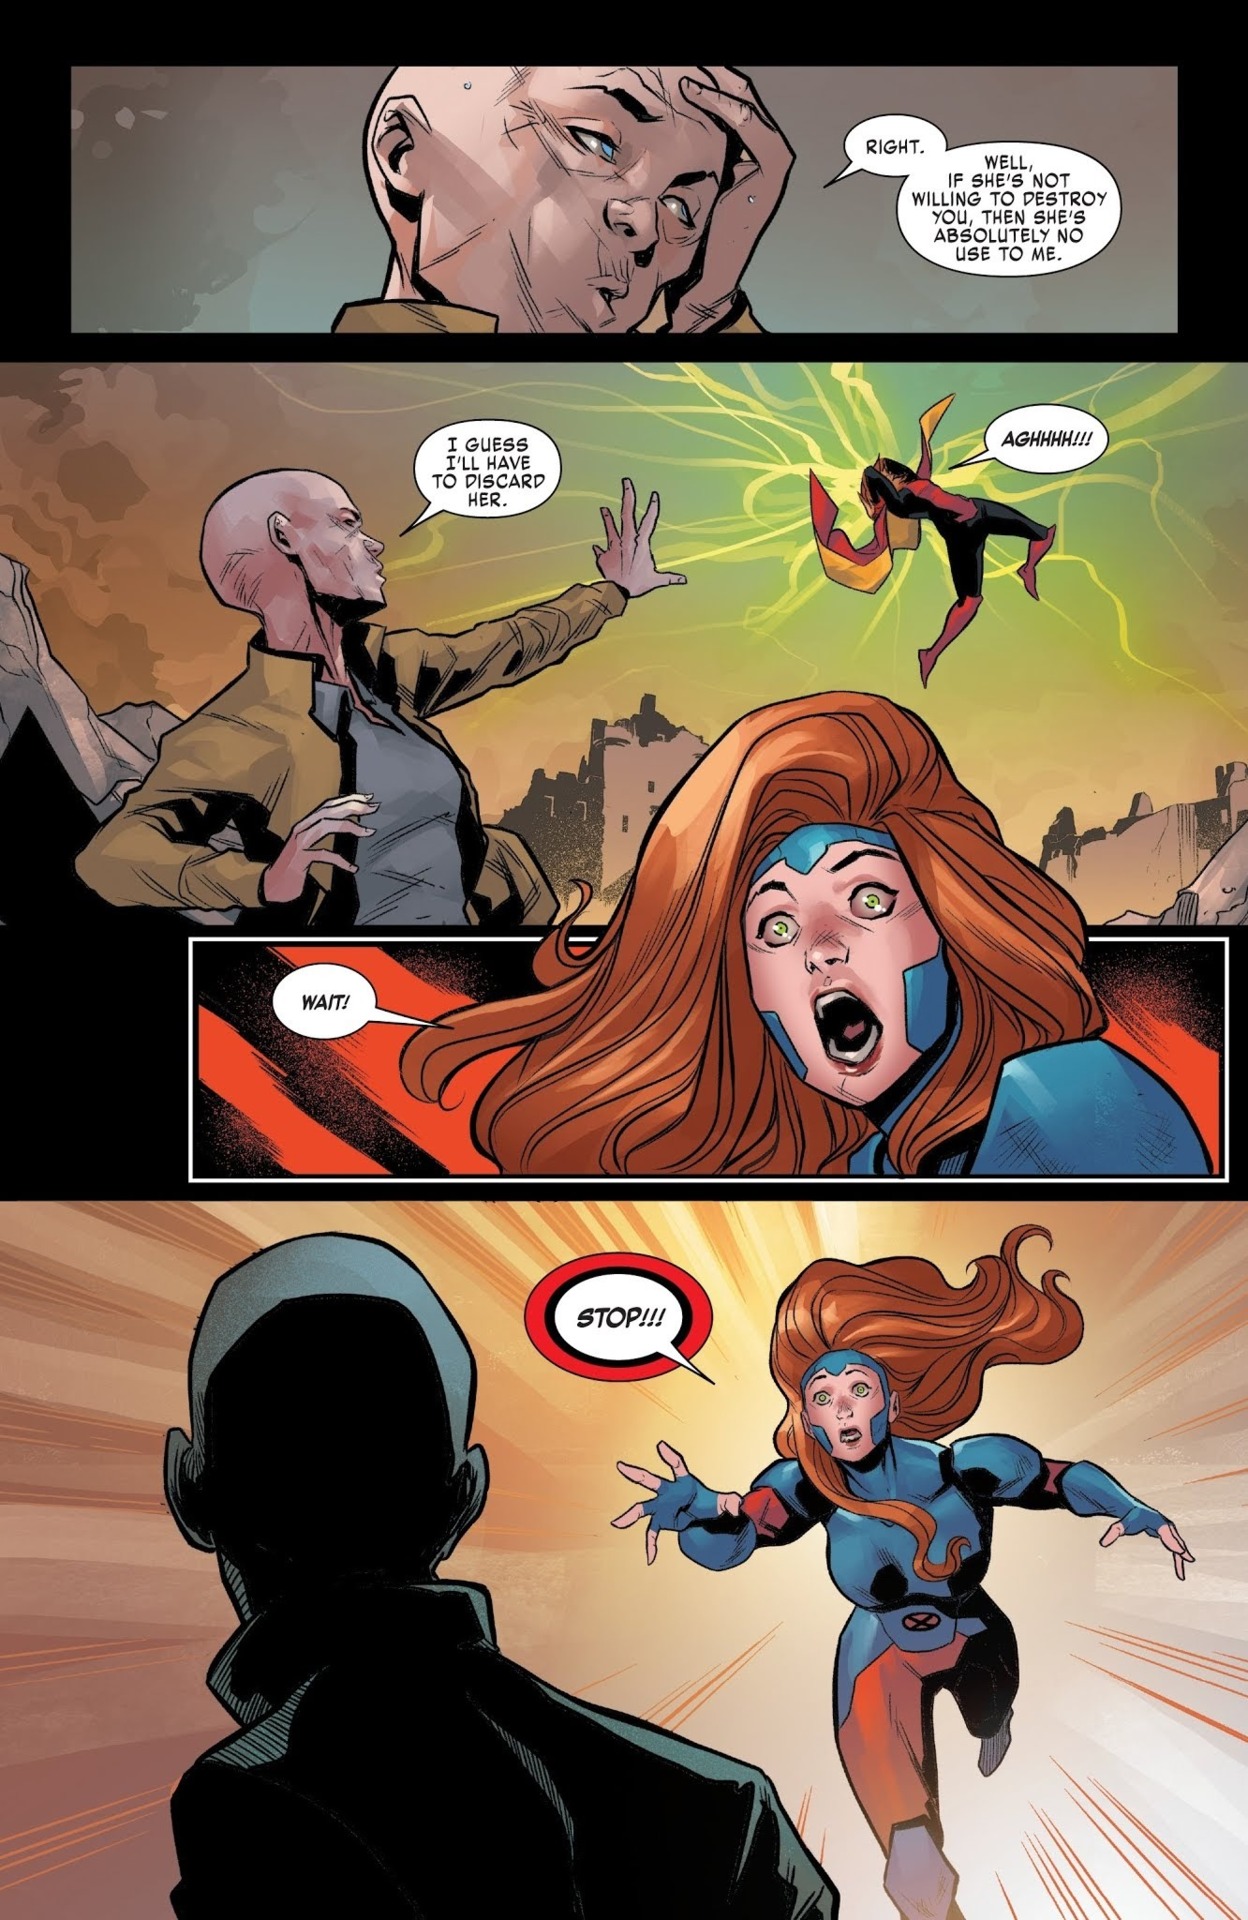 Nova takes control of Rachel Summers' mind and uses her as a pawn against Jean. When she realizes Rachel is able to hold back against Jean, Nova decides to get rid of her and attacks her mind